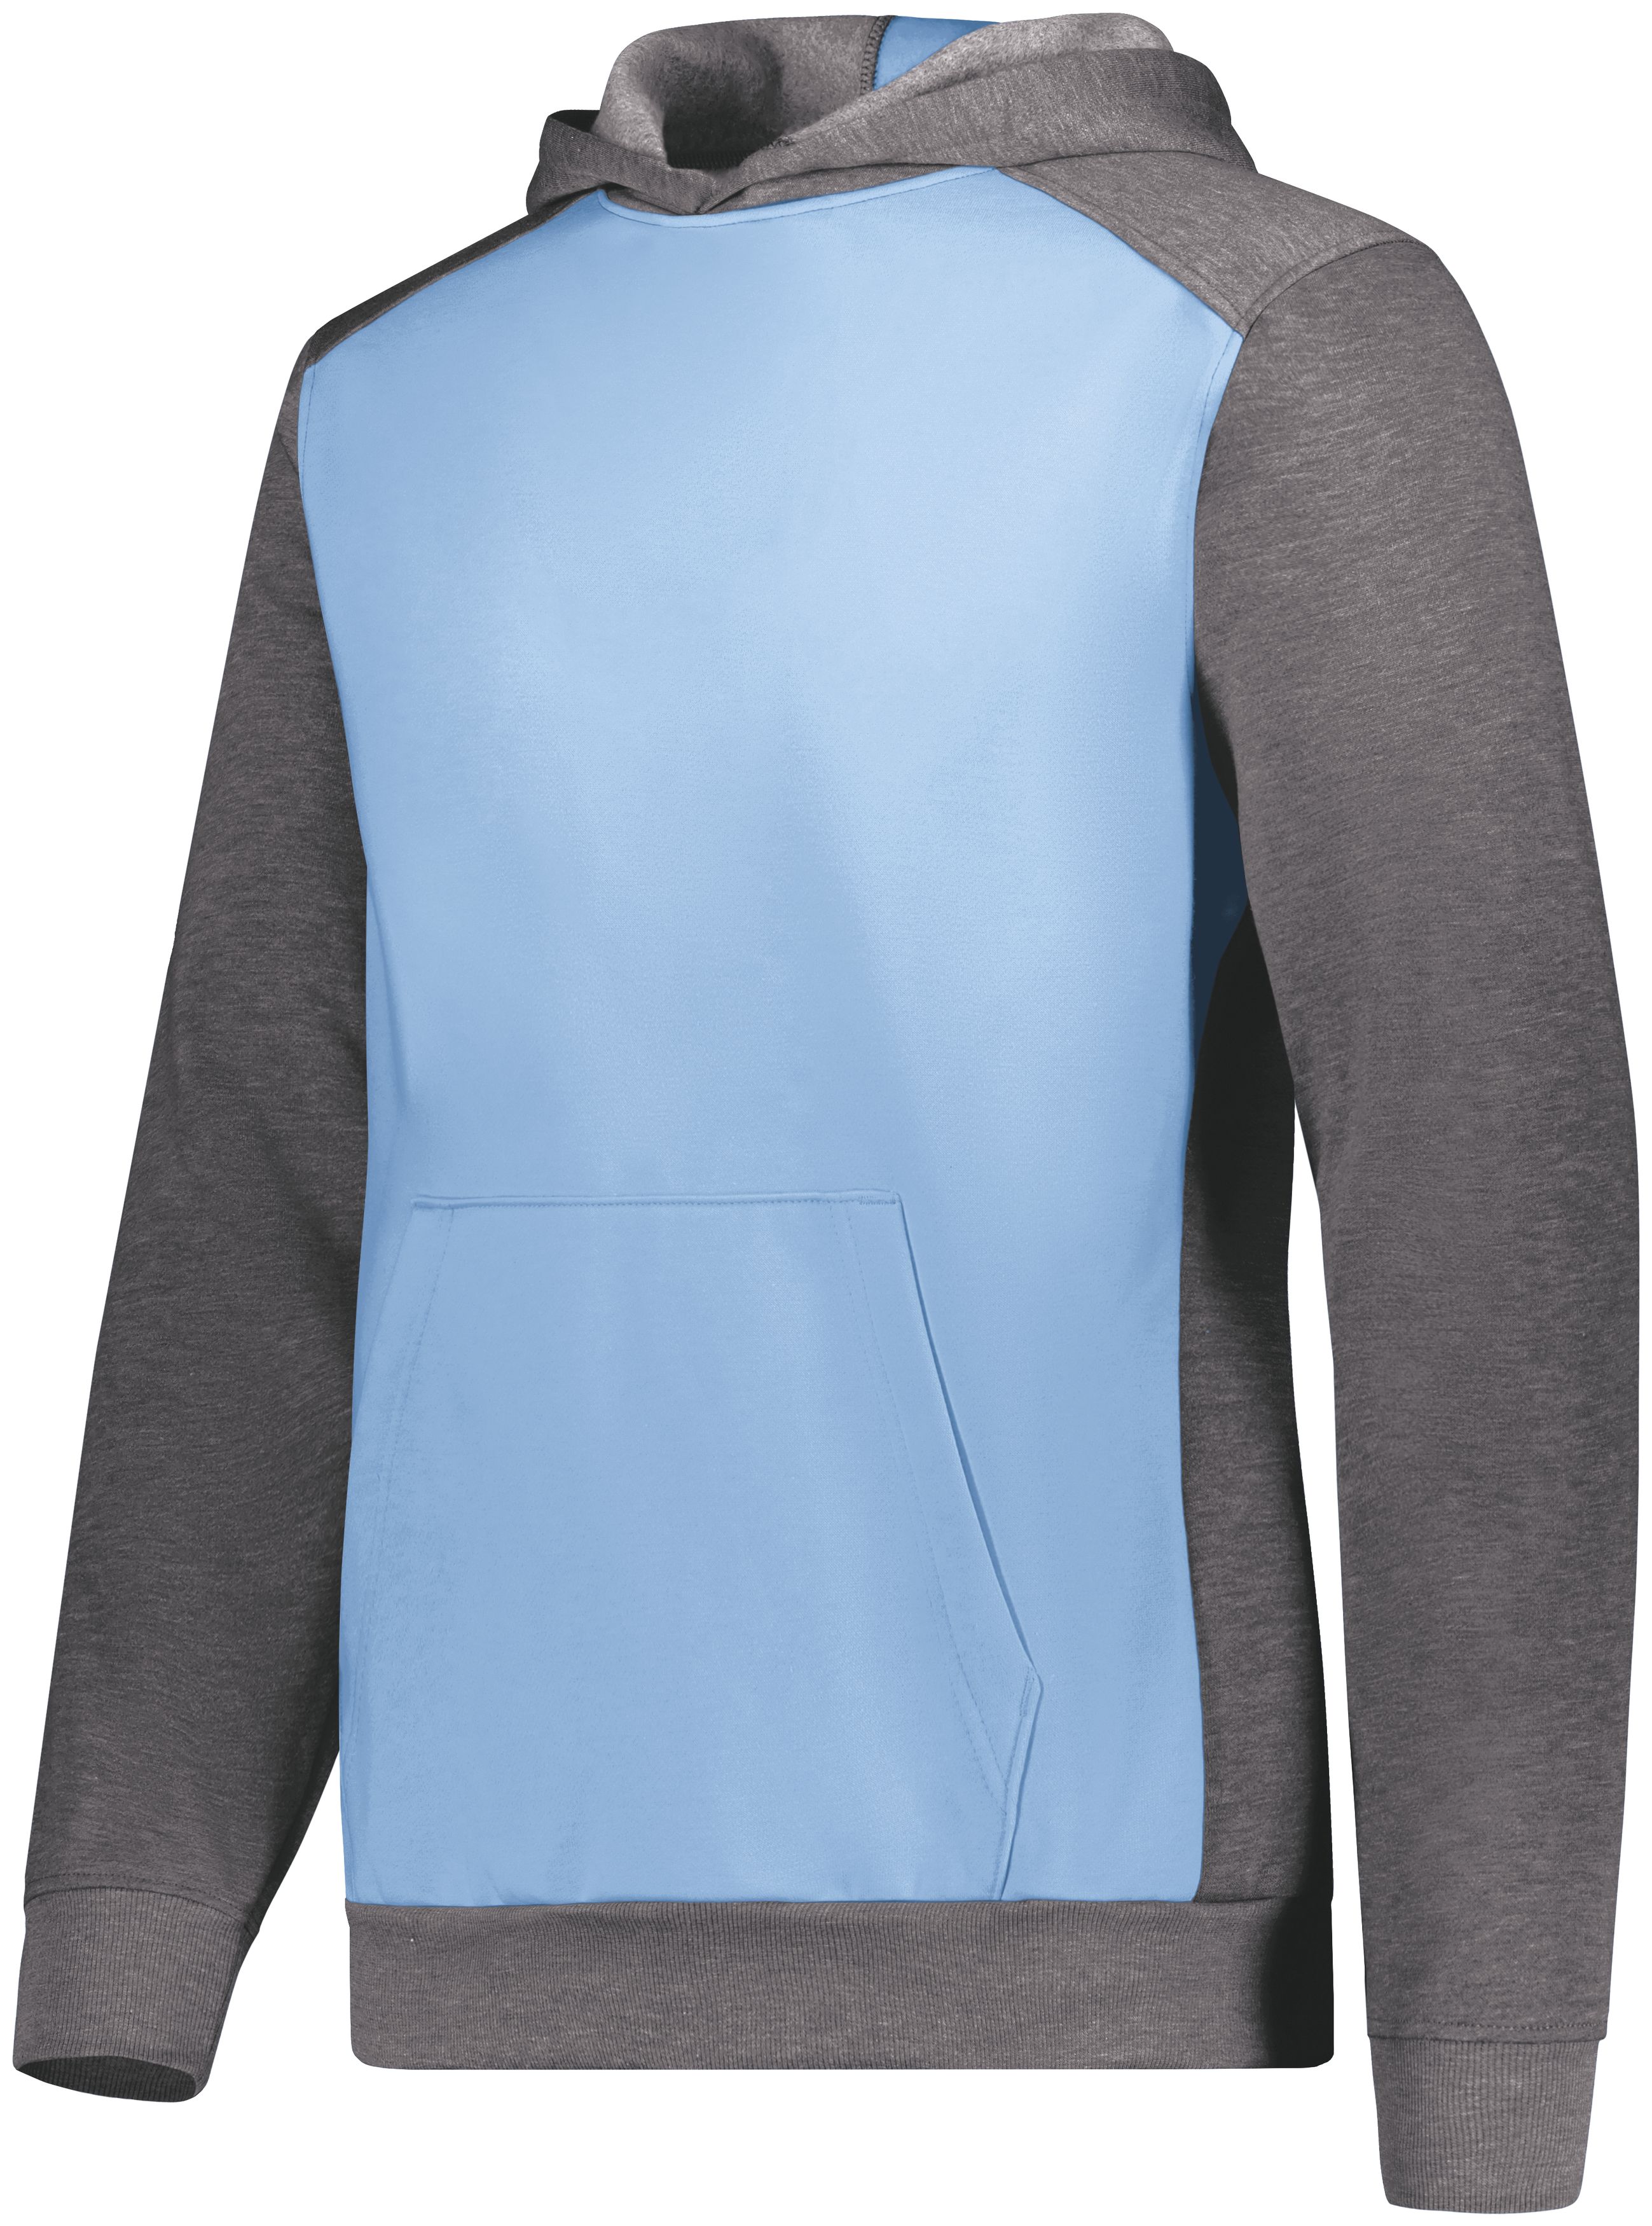 click to view Columbia Blue/Carbon Heather